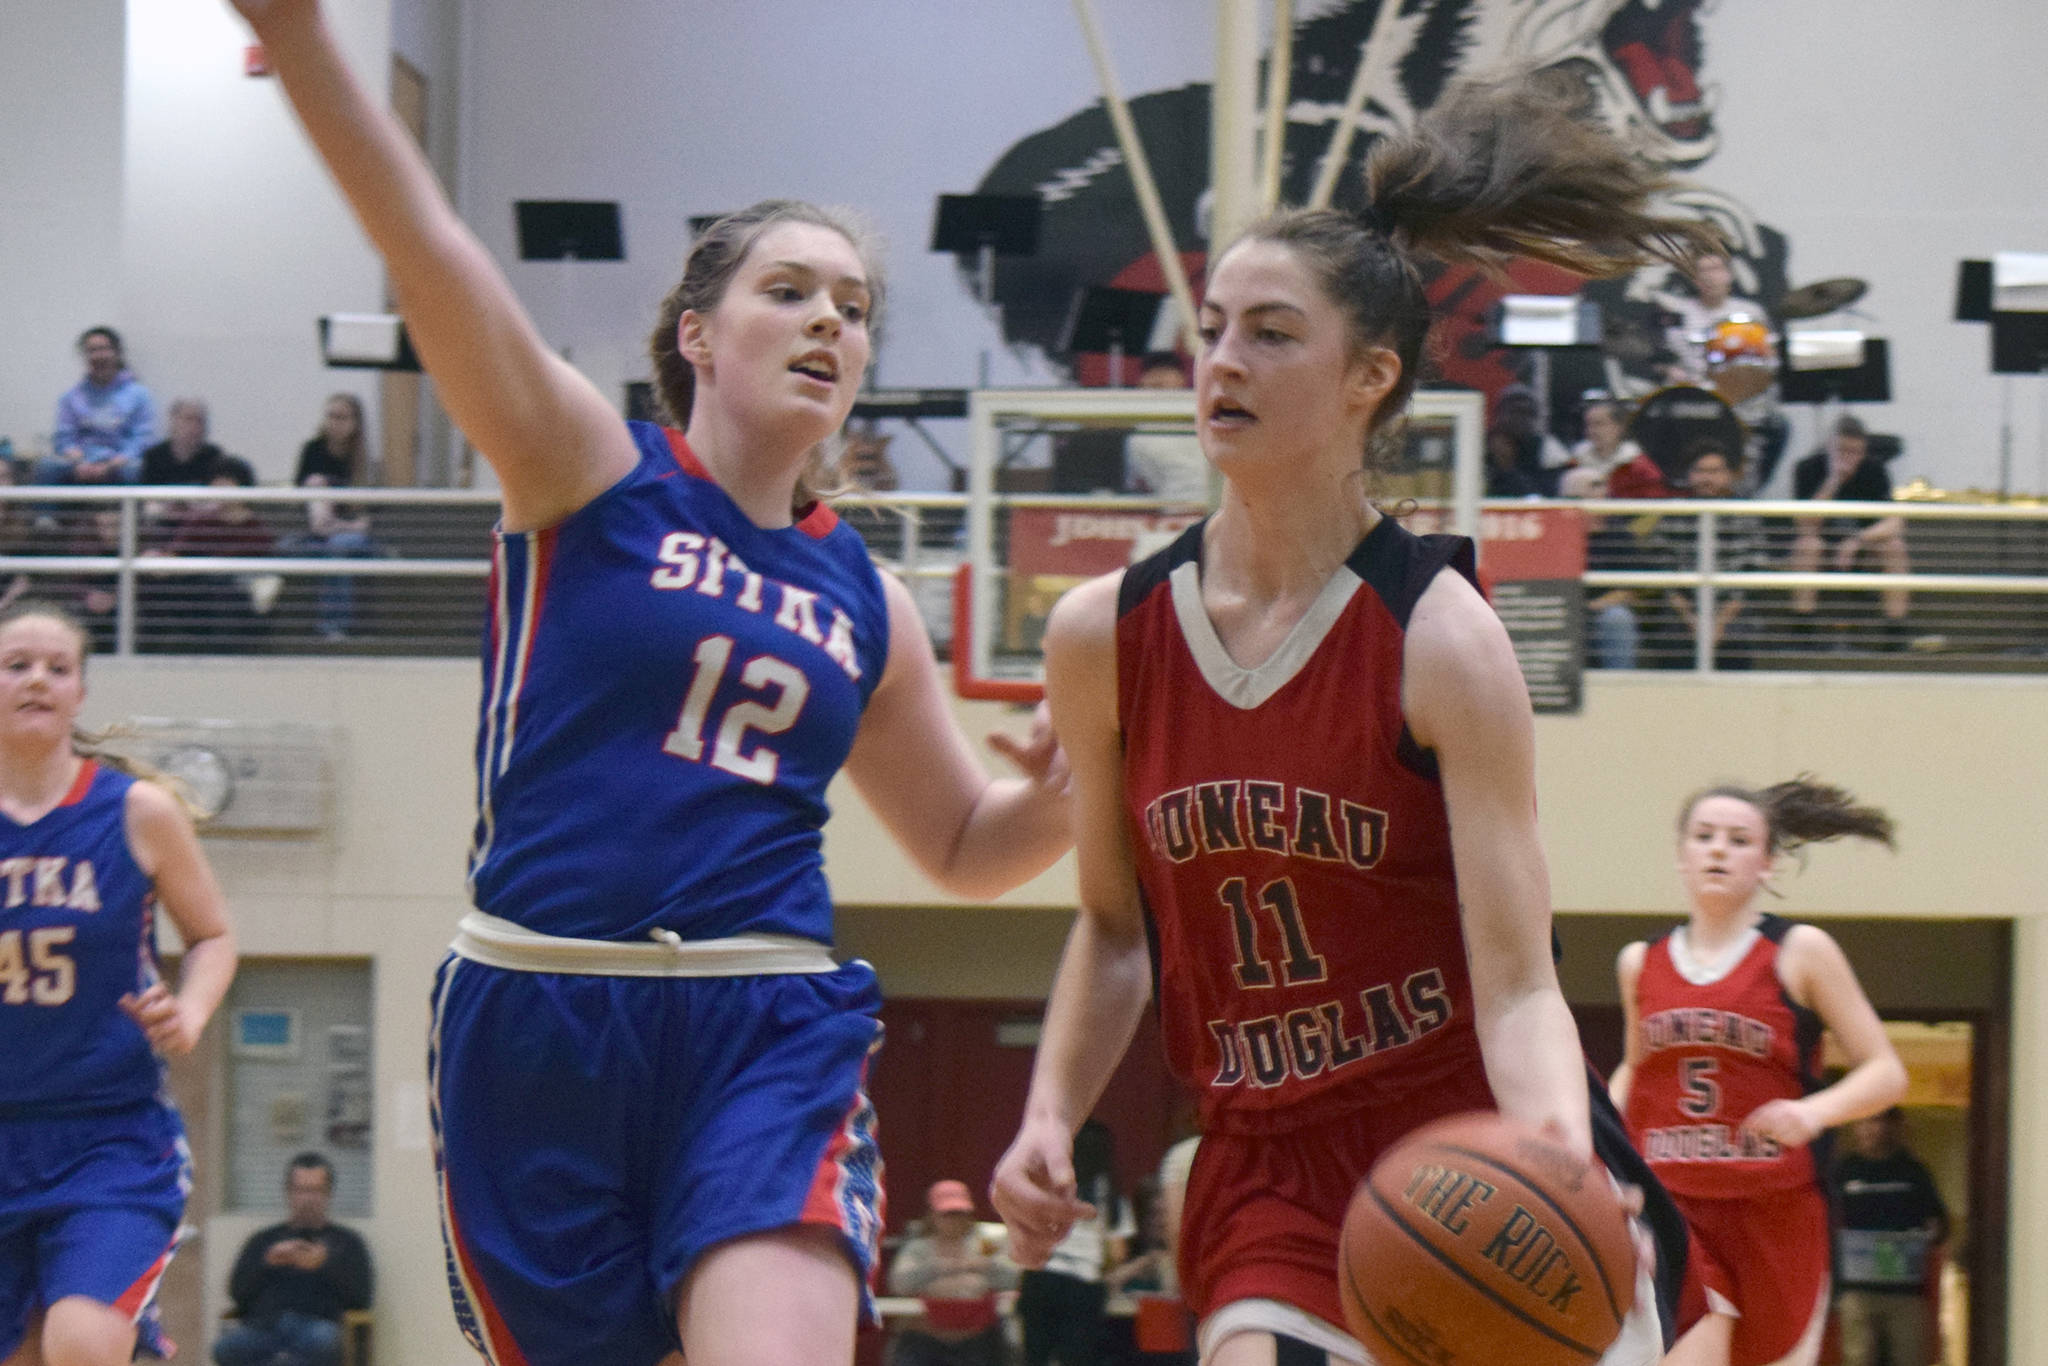 ‘Sky is the limit:’ JDHS girls roll to Classic win